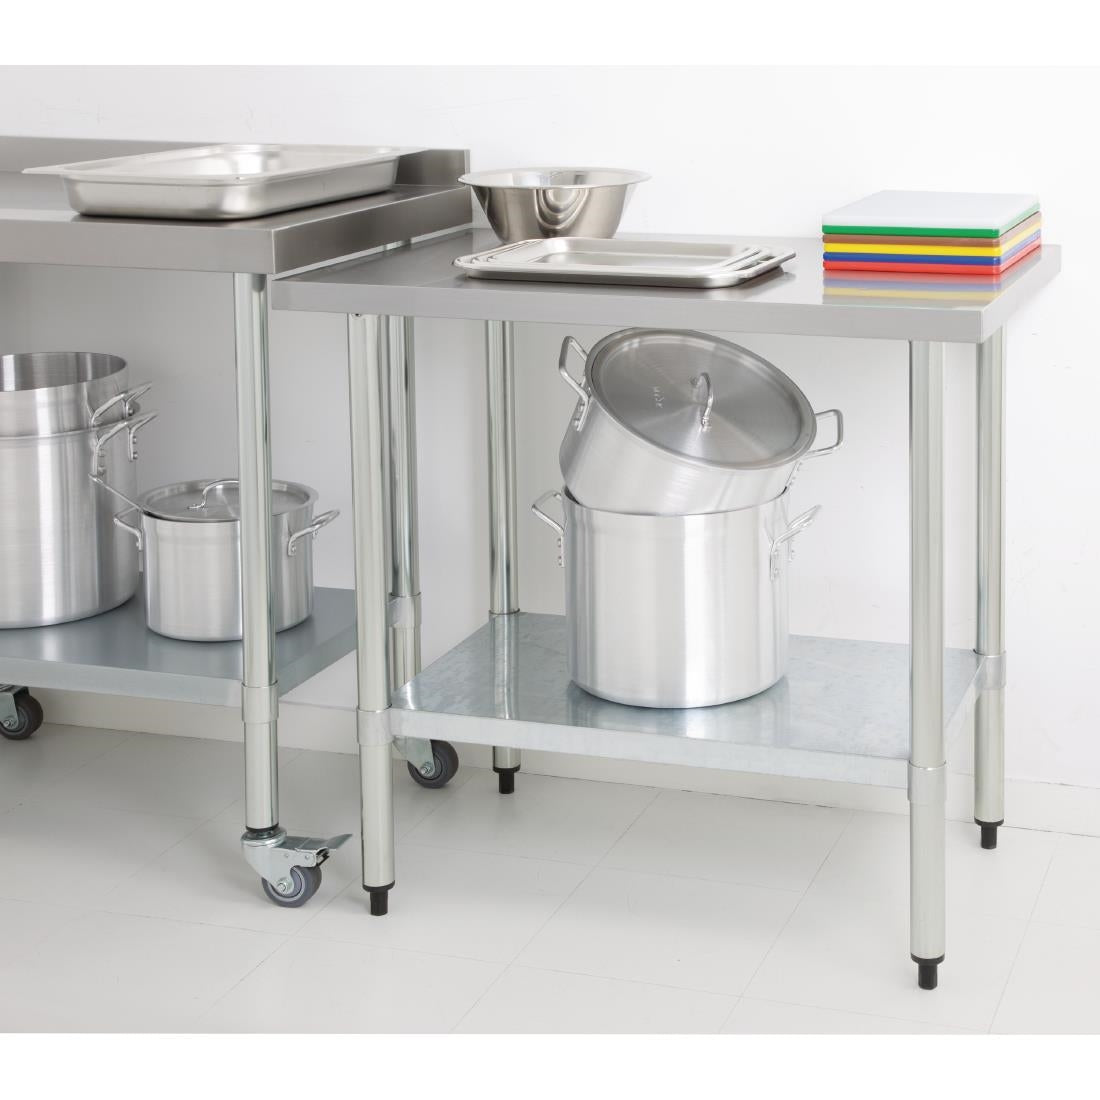 GJ504 Vogue Stainless Steel Prep Table 1800mm JD Catering Equipment Solutions Ltd